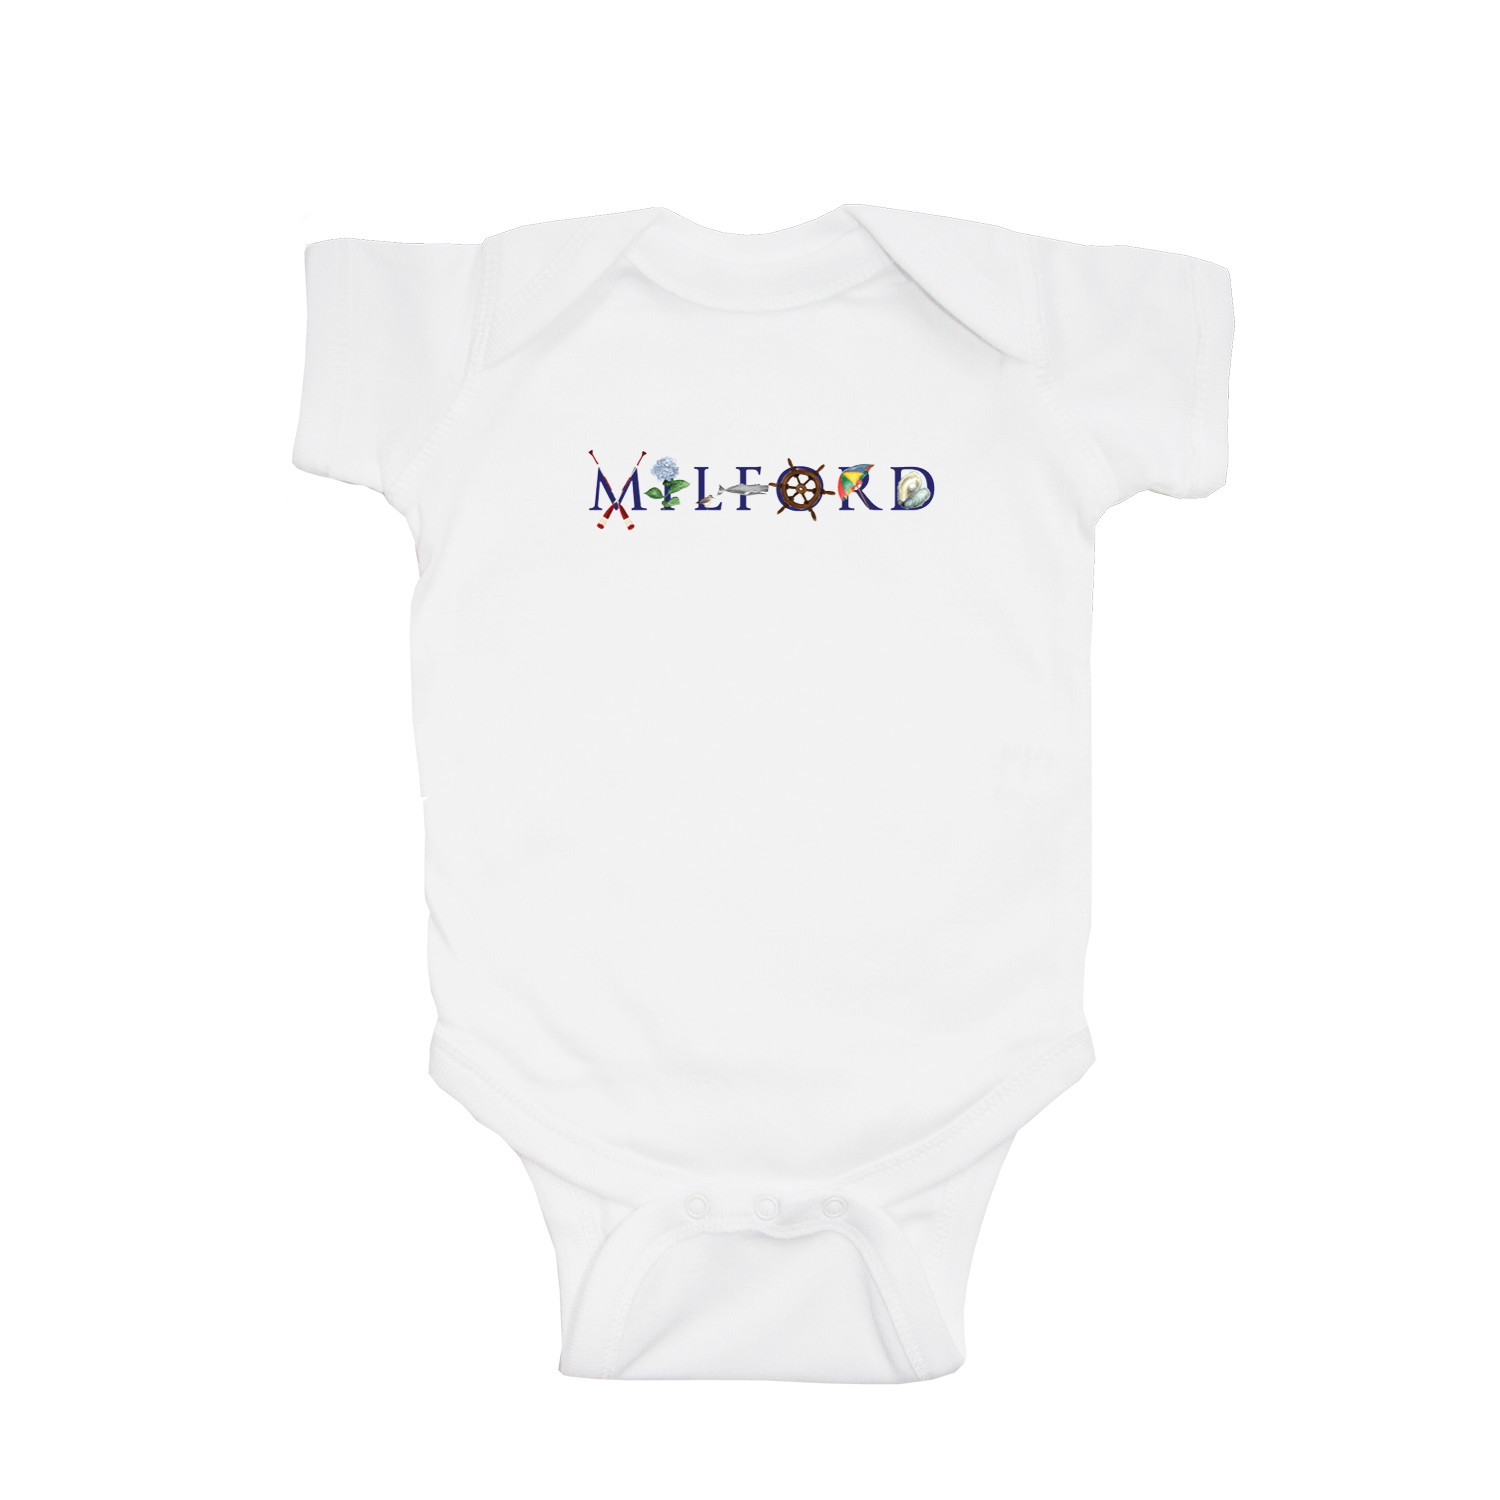 milford, ct baby snap up short sleeve